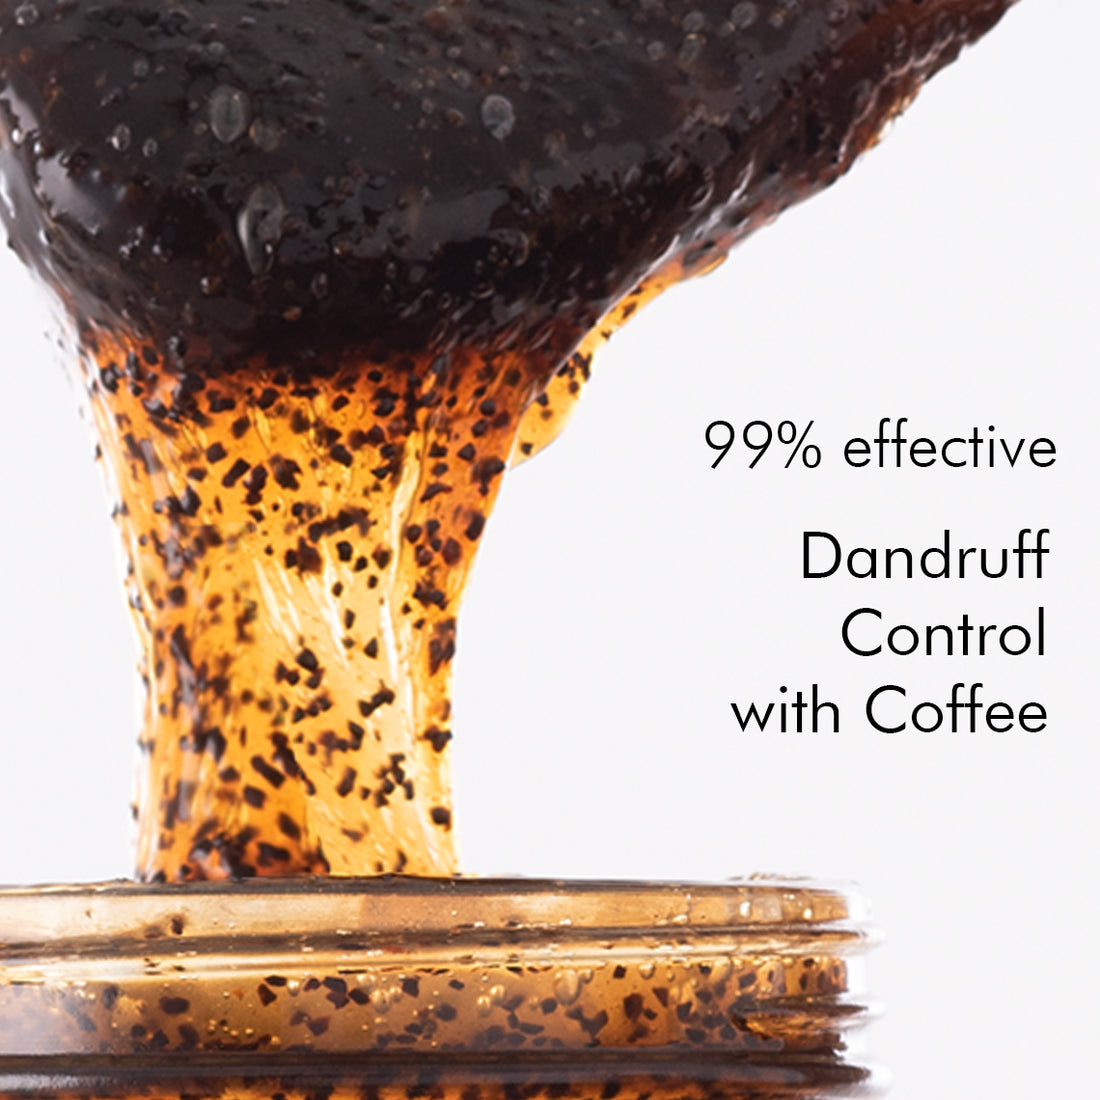 Coffee For Dandruff? Here's all that you need to know!